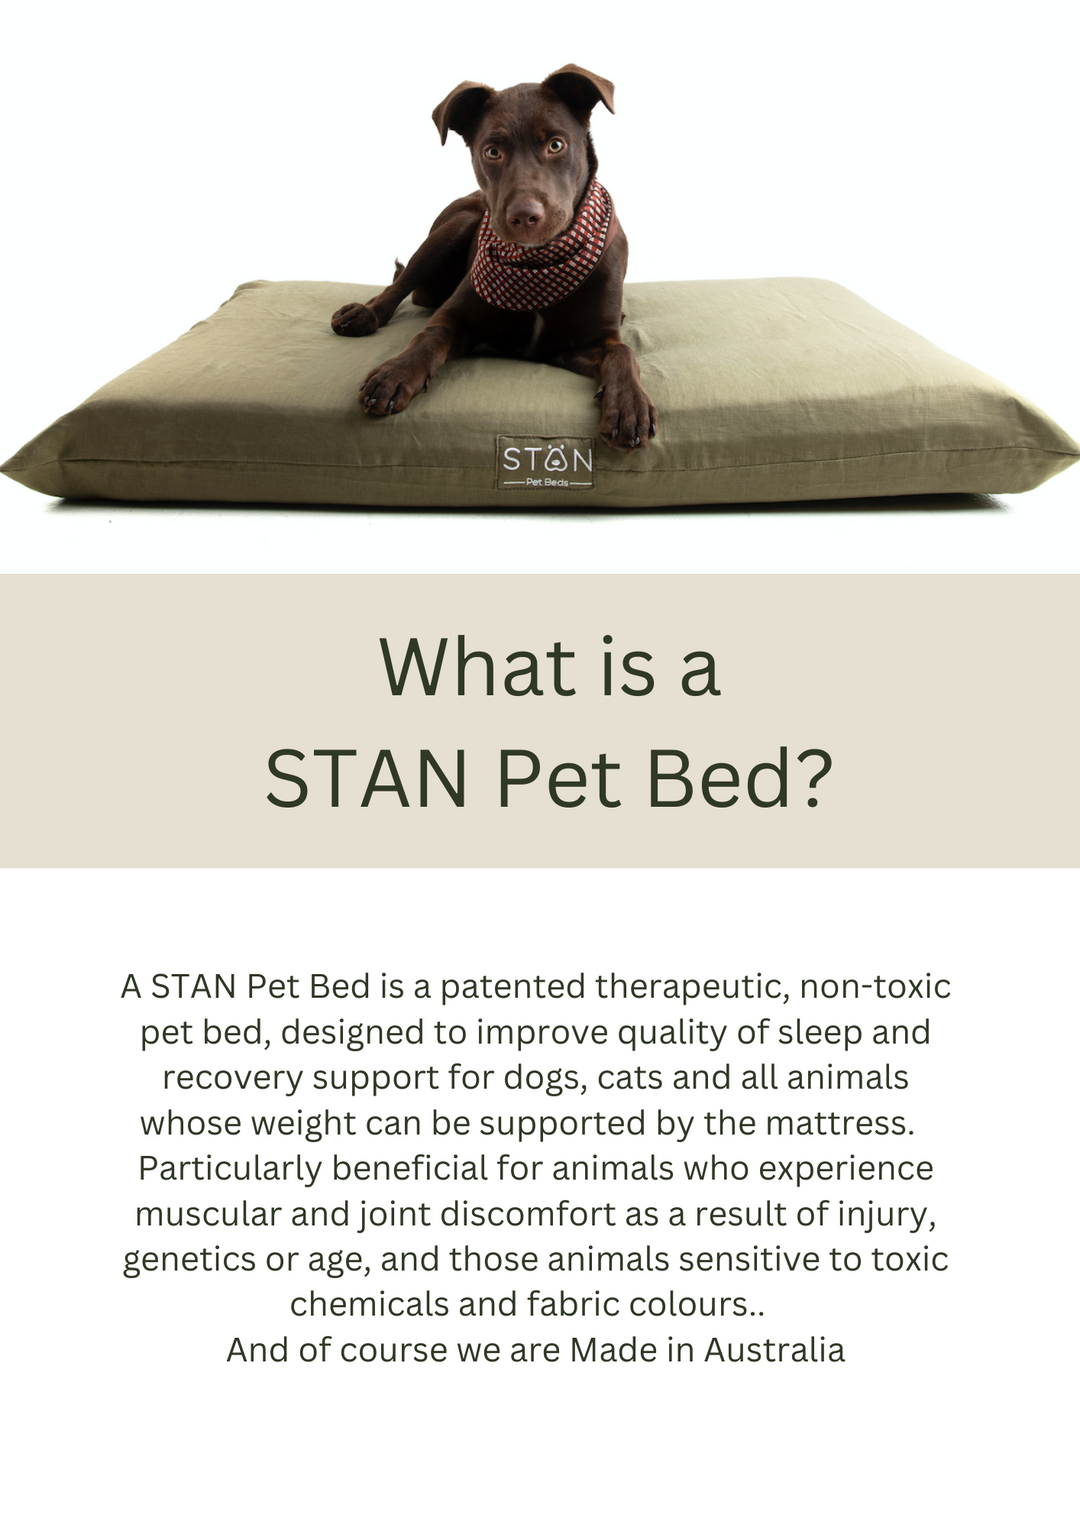 Stan Active Dog Bed